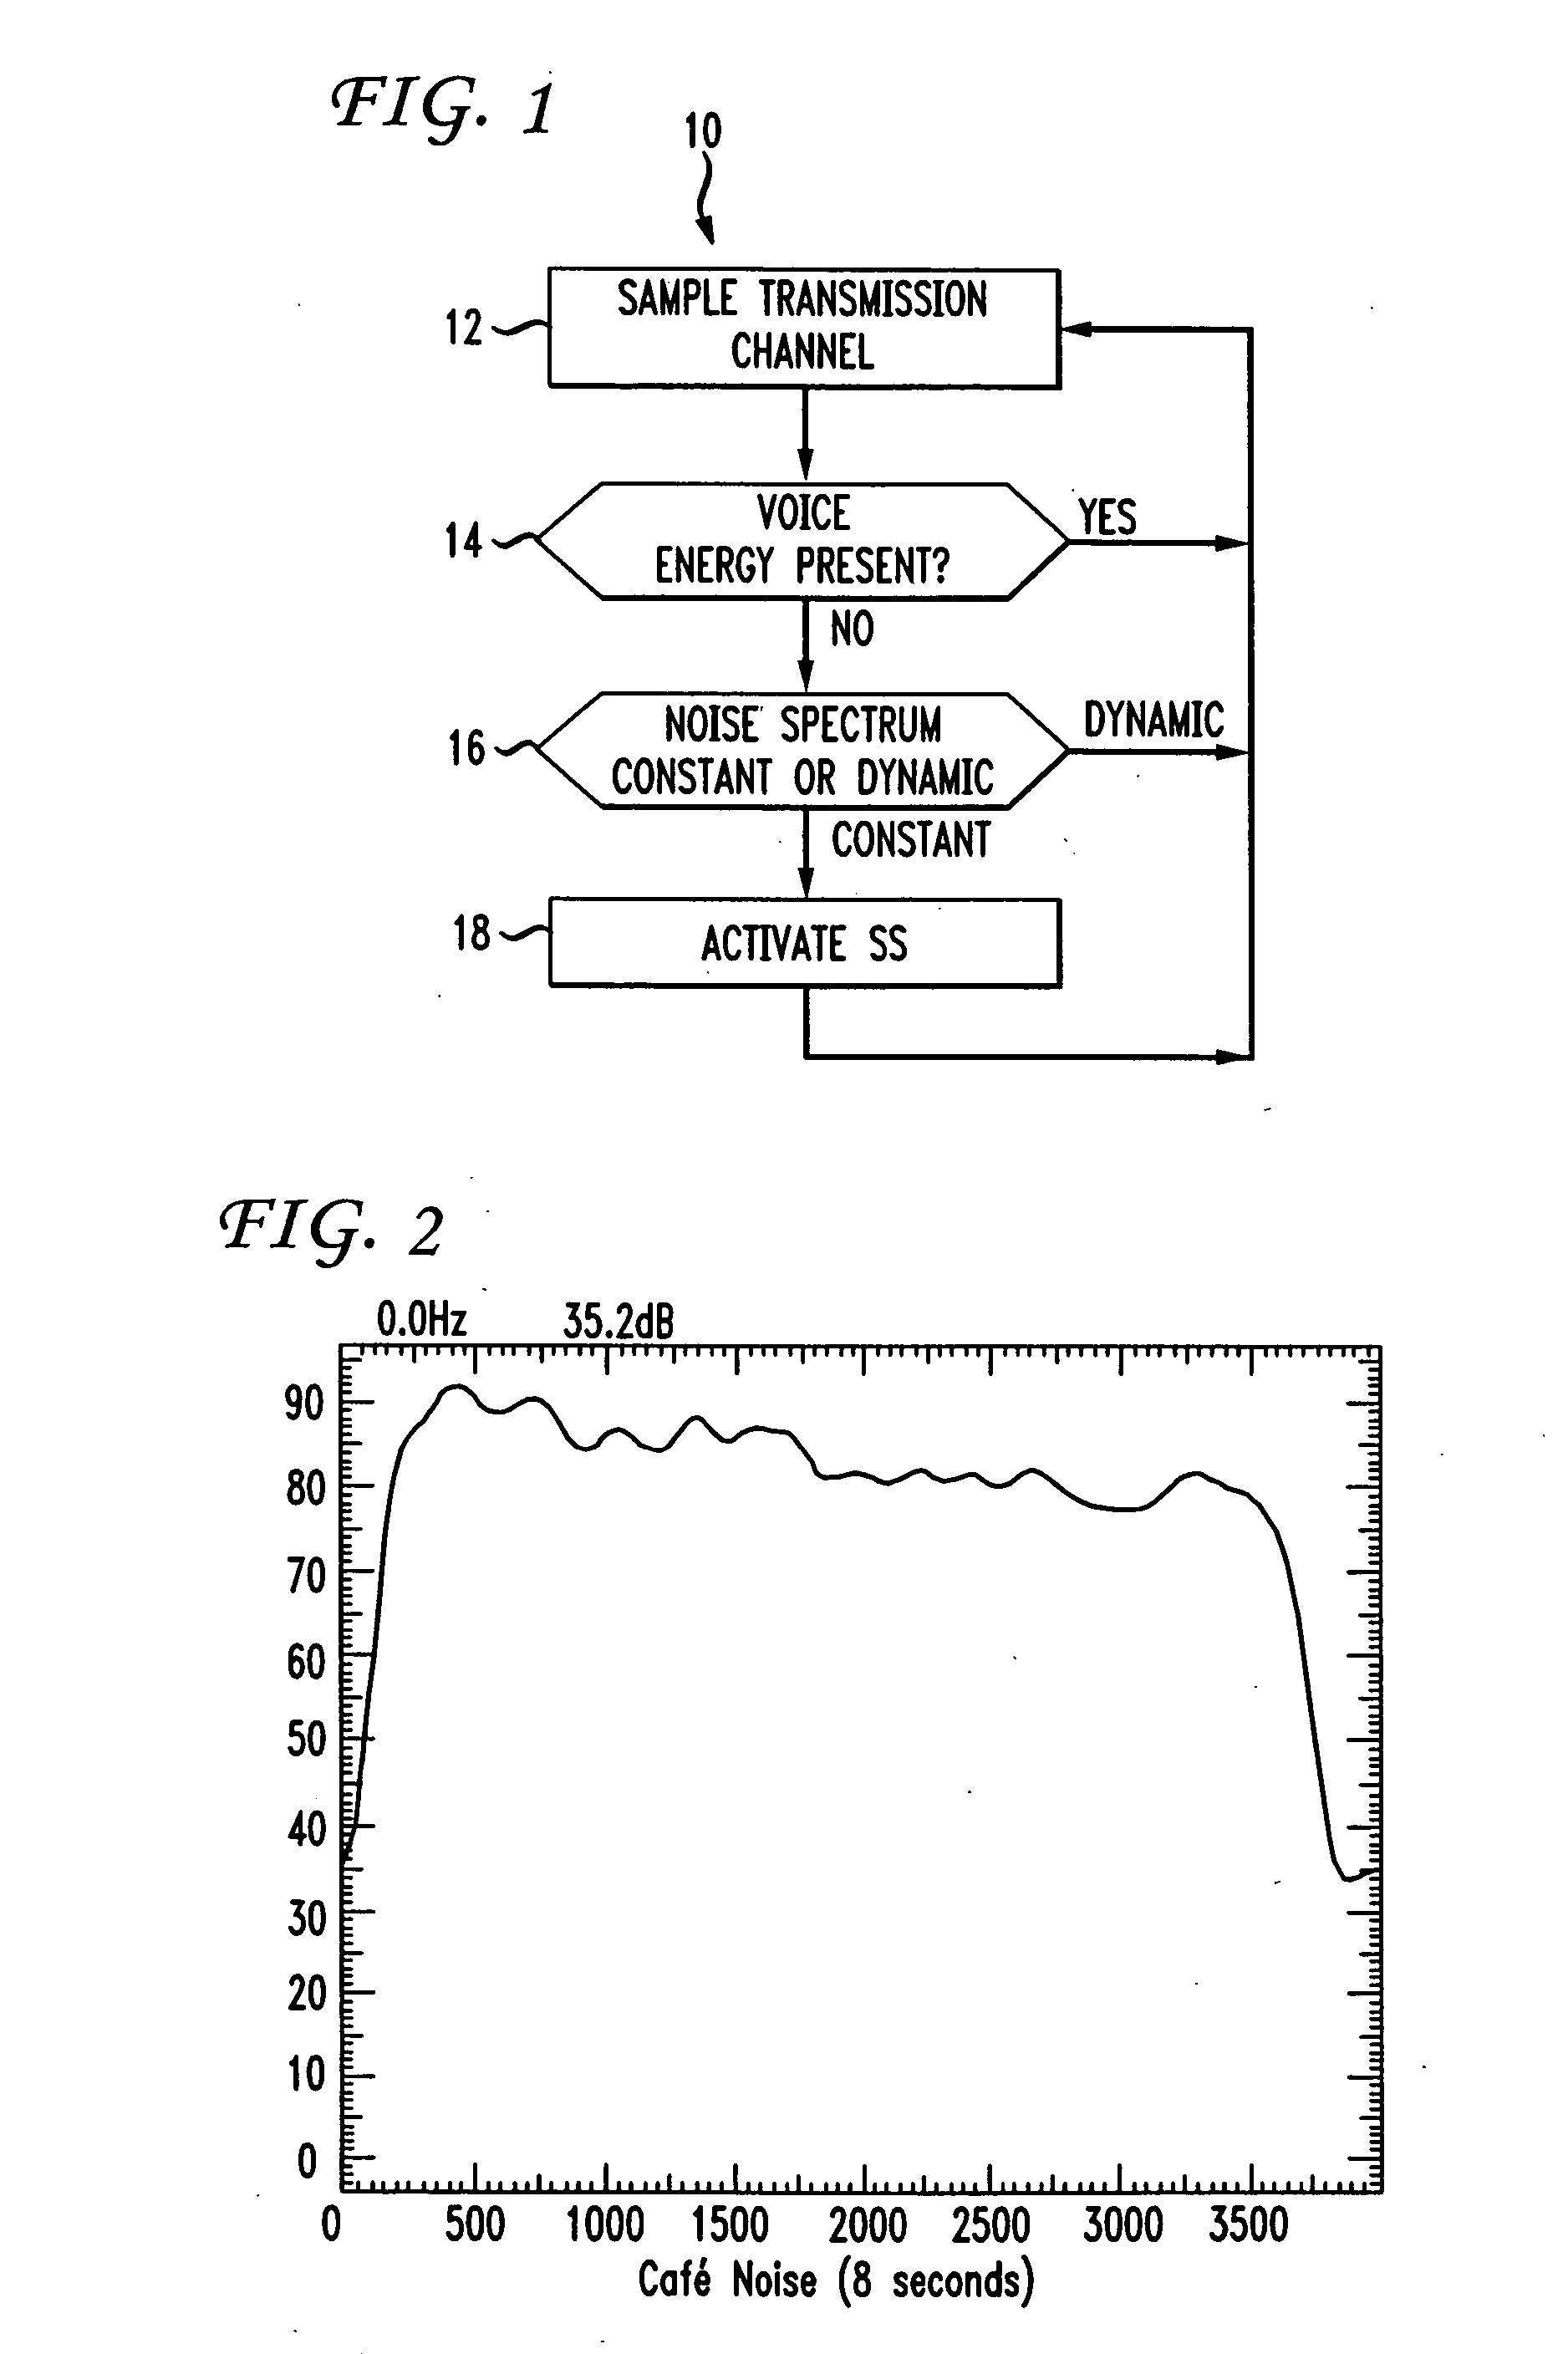 Operating method for voice activity detection/silence suppression system